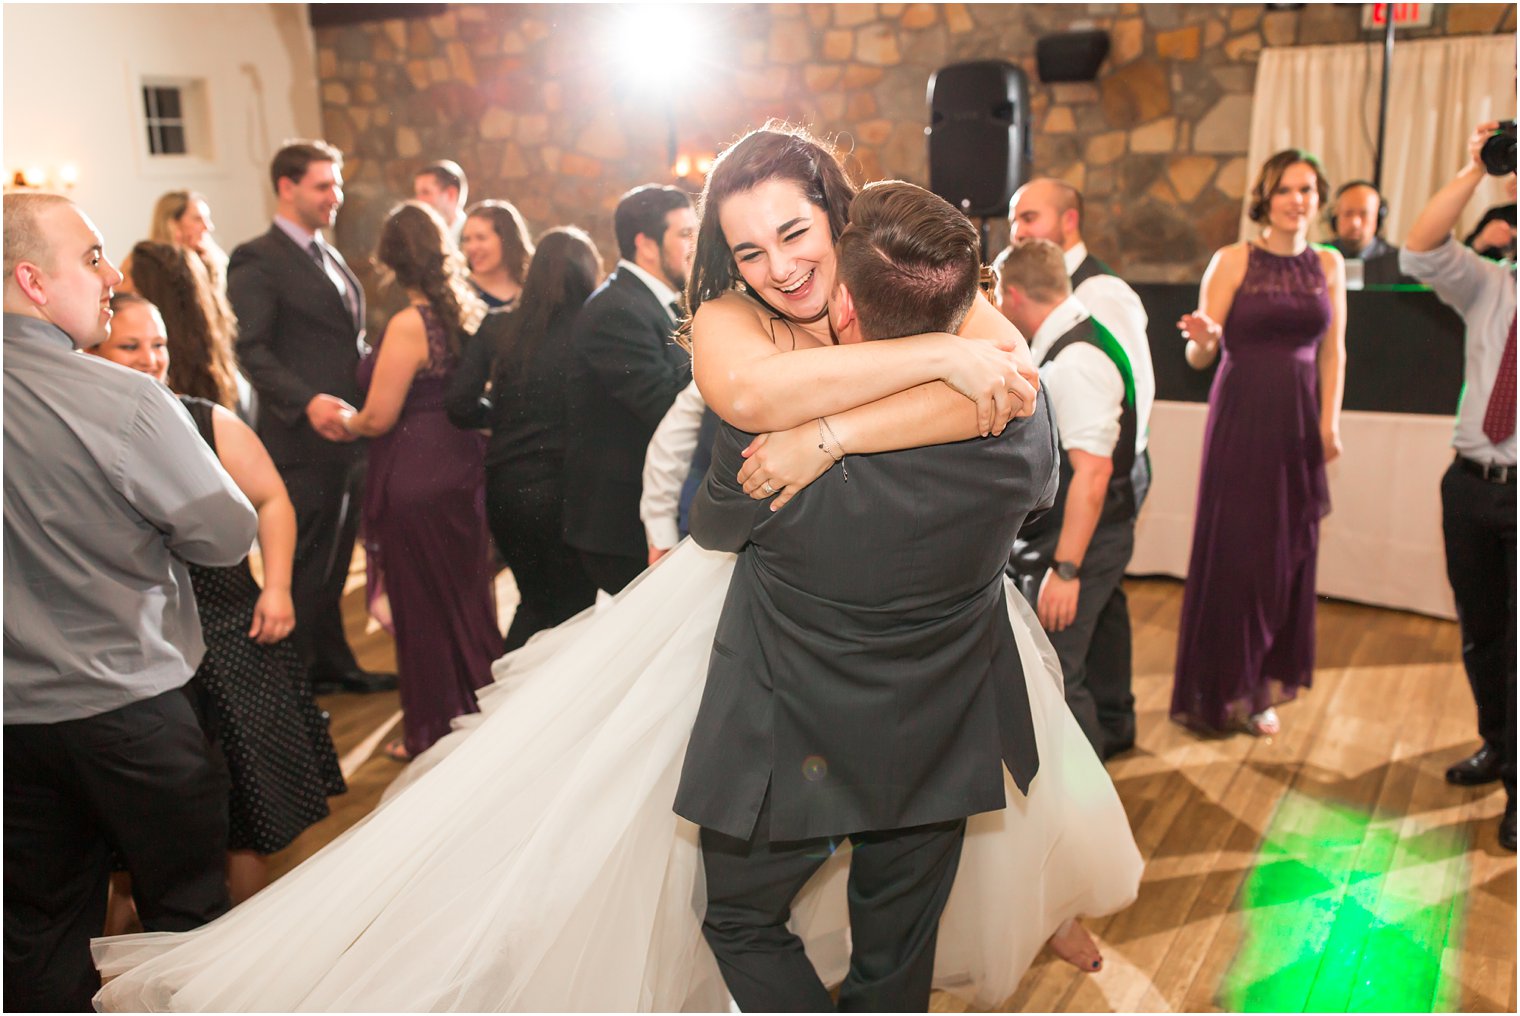 Bride and groom on the dance floor | Music by Encore Entertainment | Photo by PA Wedding Photographers Idalia Photography